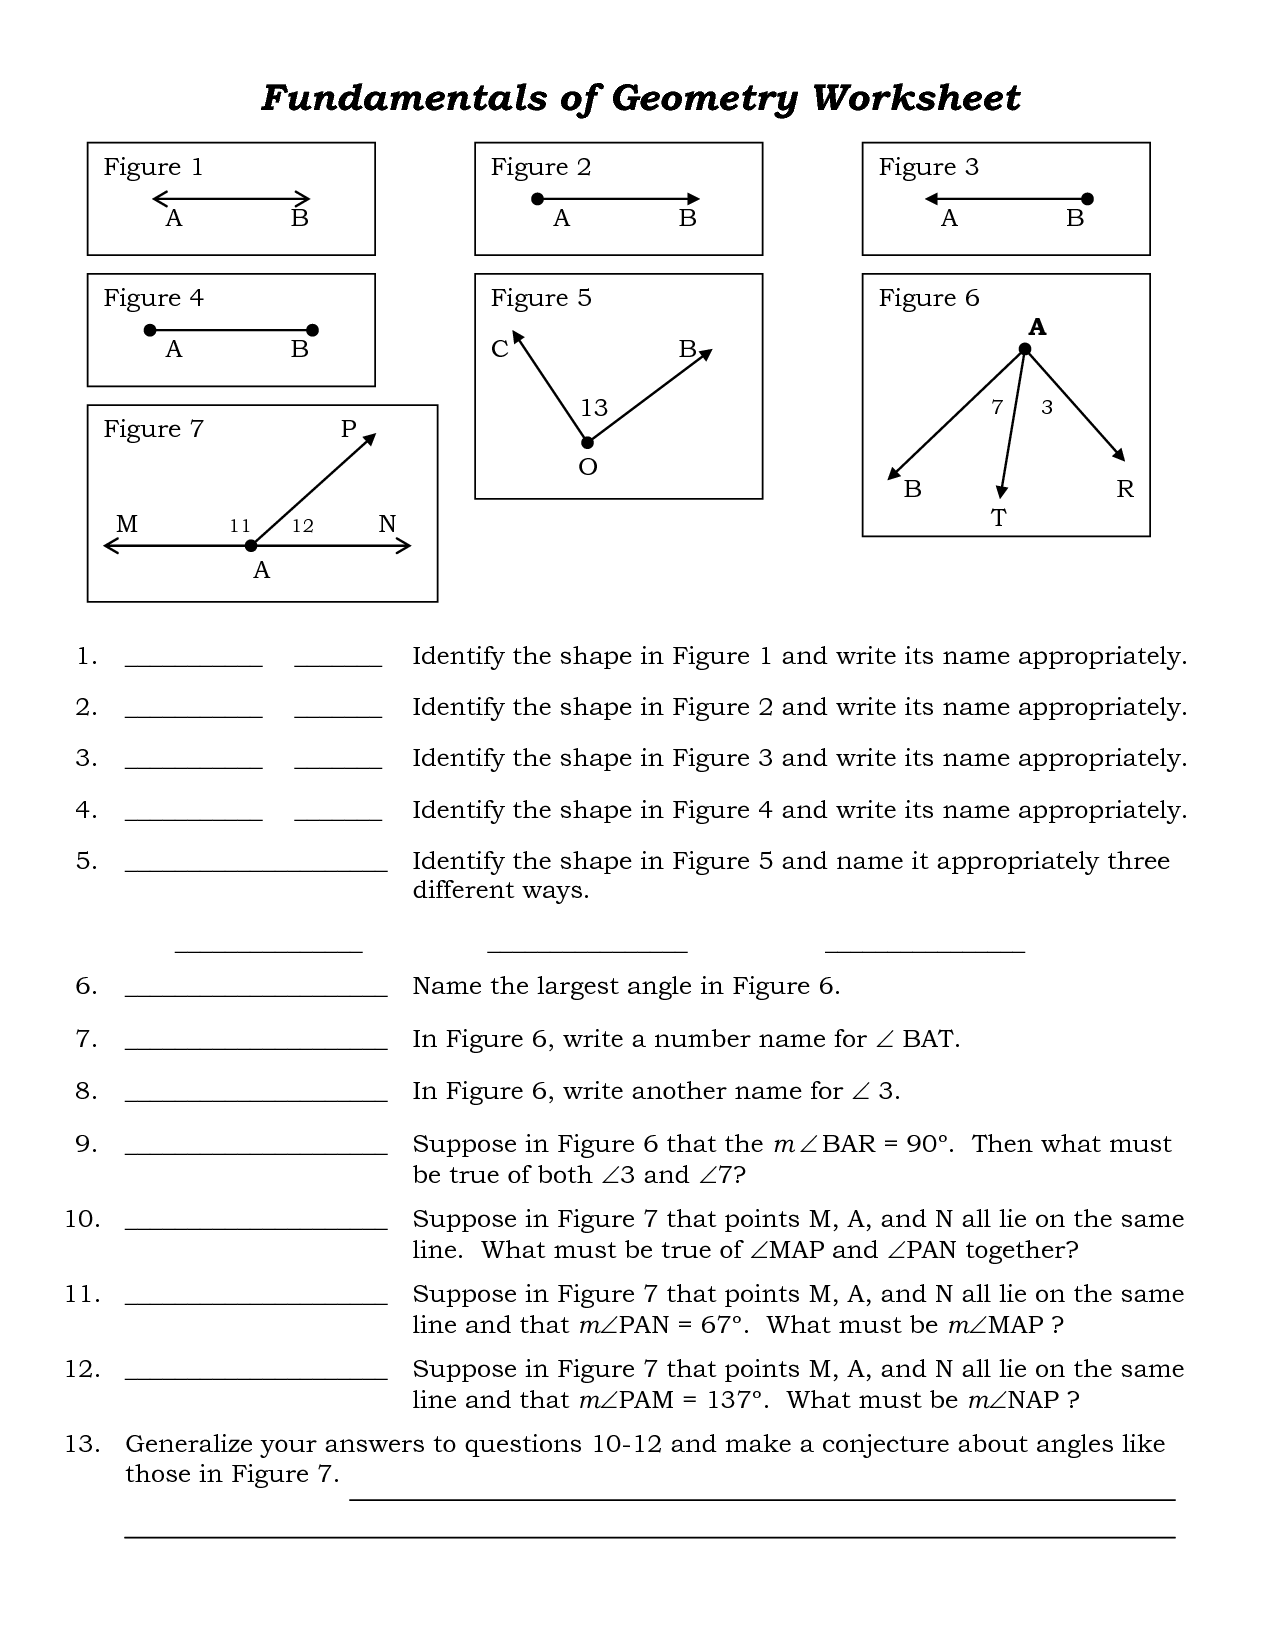 7 Best Images Of Printable Worksheets For High School Students High School Student Worksheets